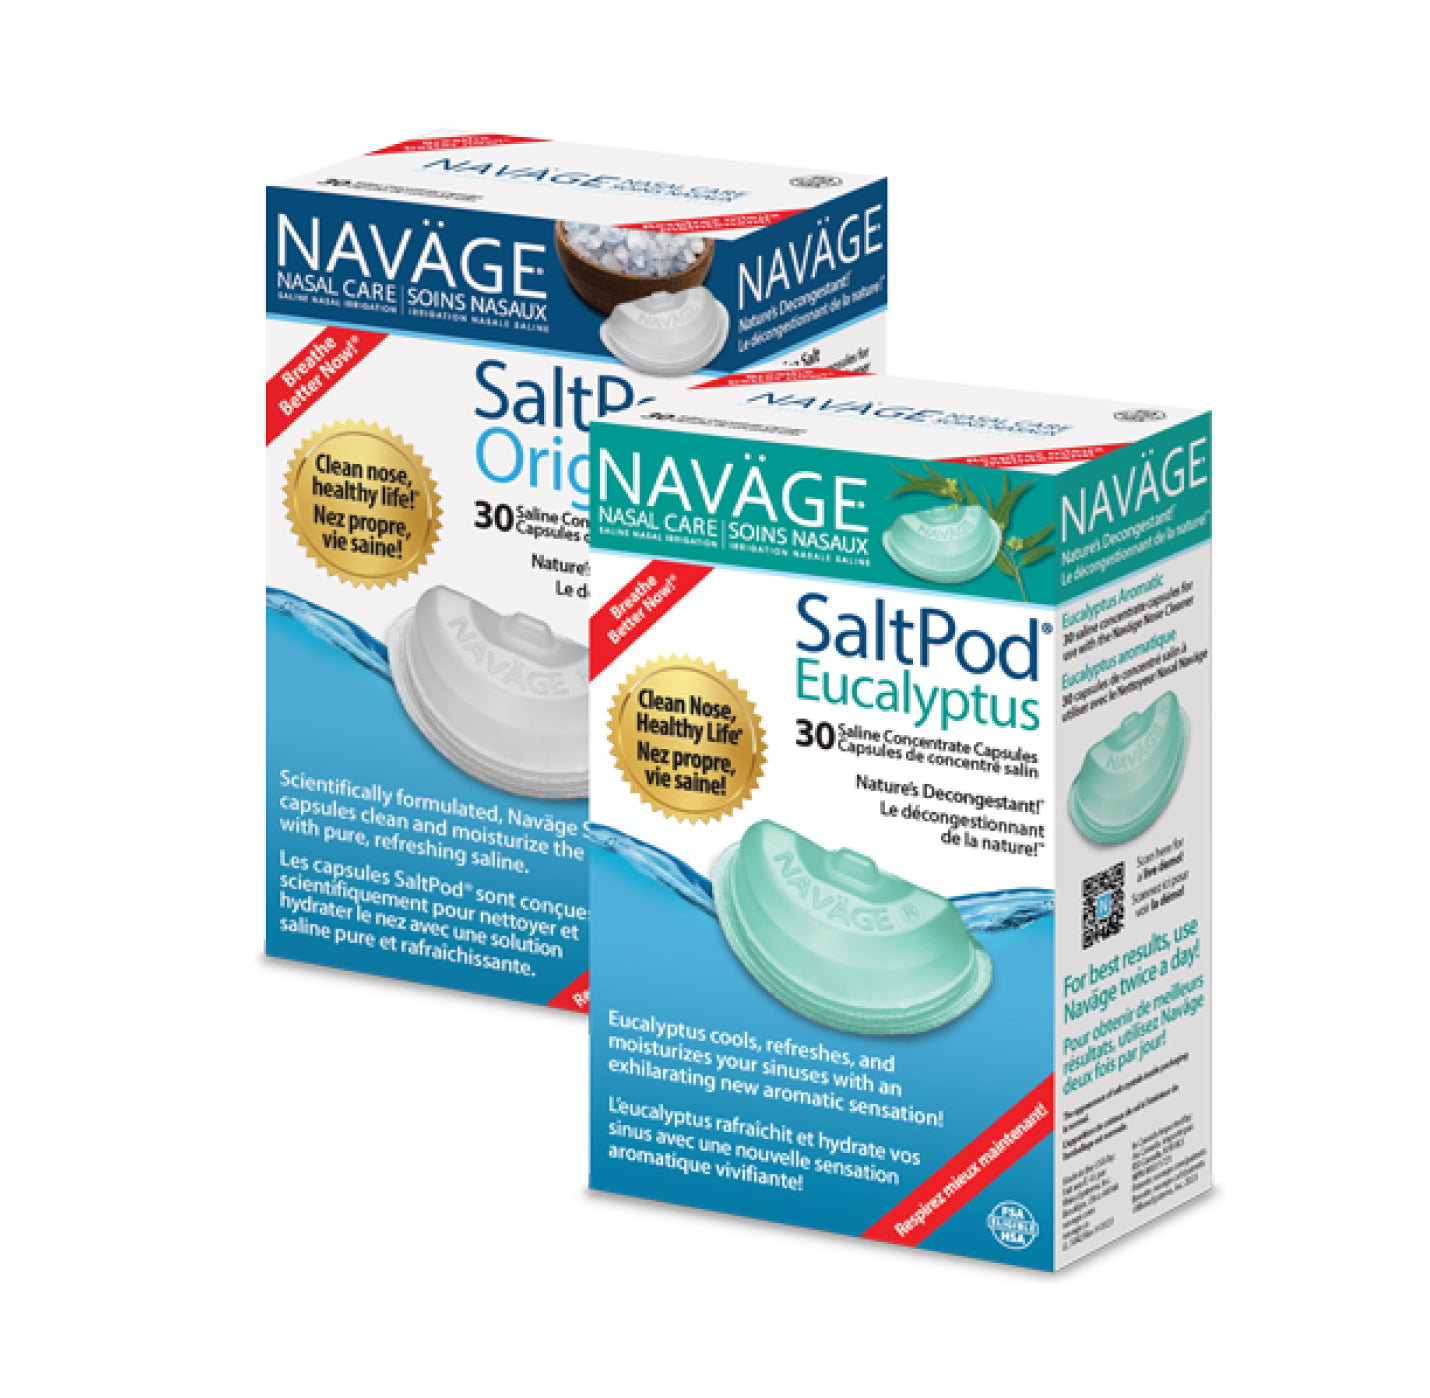 NEW Aromatic Neti Salt! - The Perfect Addition to Your Nasal Care